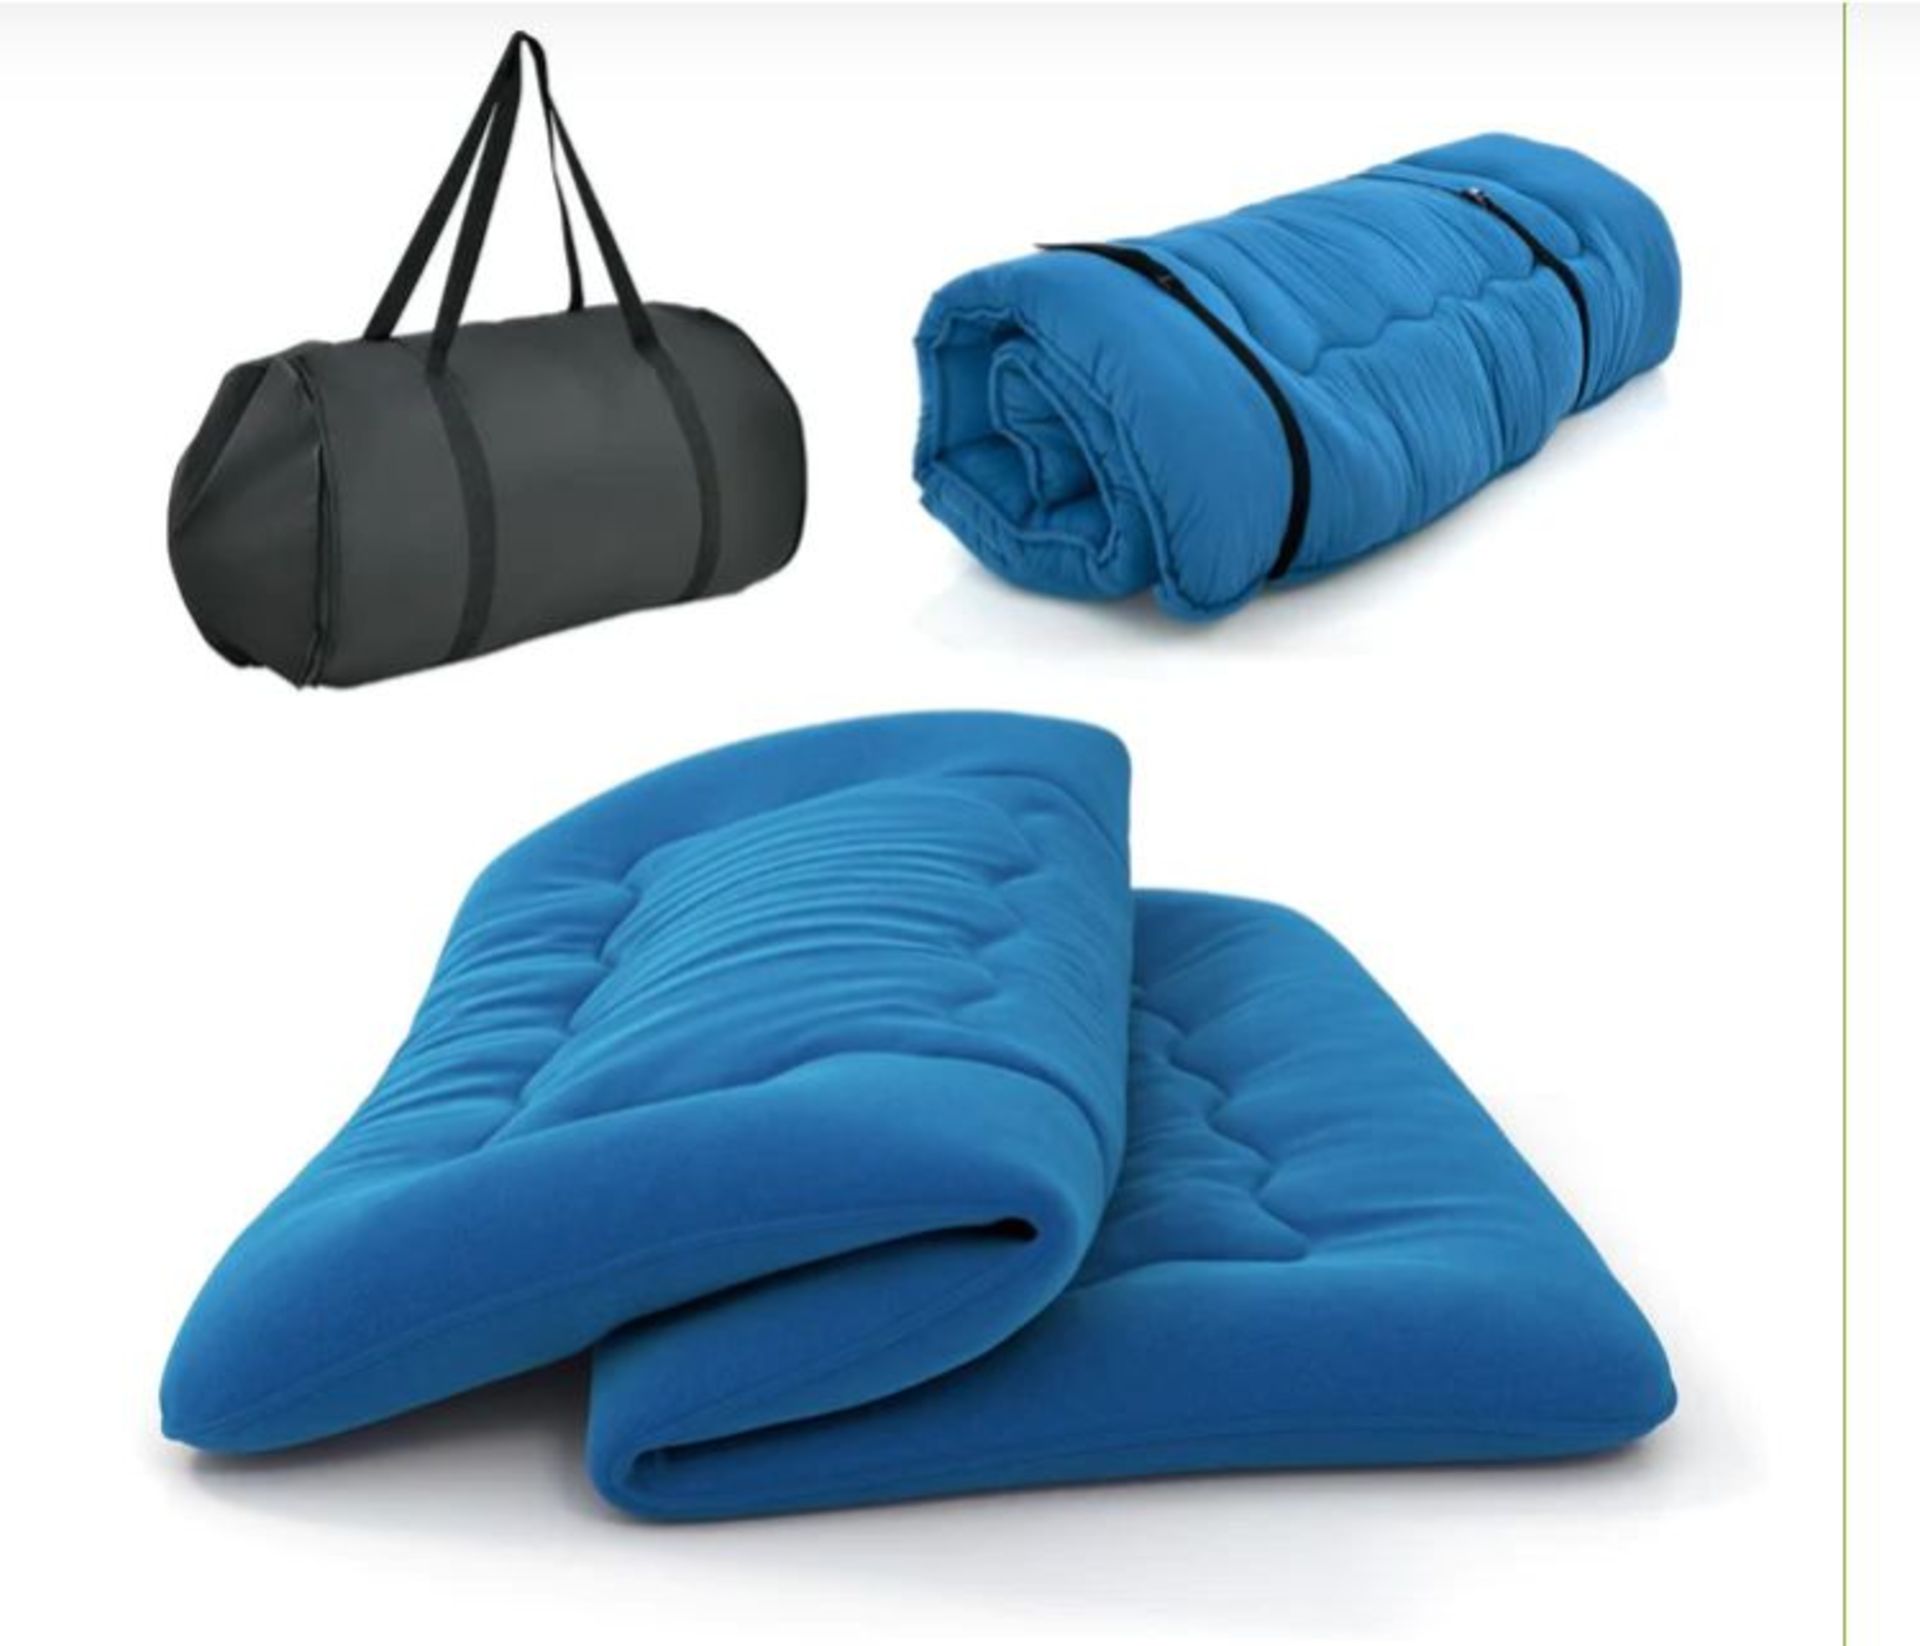 FLOOR FUTON MATTRESS MEDIUM FIRM THICKENED TATAMI MAT WITH CARRYING BAG-BLUE-DOUBLE SIZE. - ER53